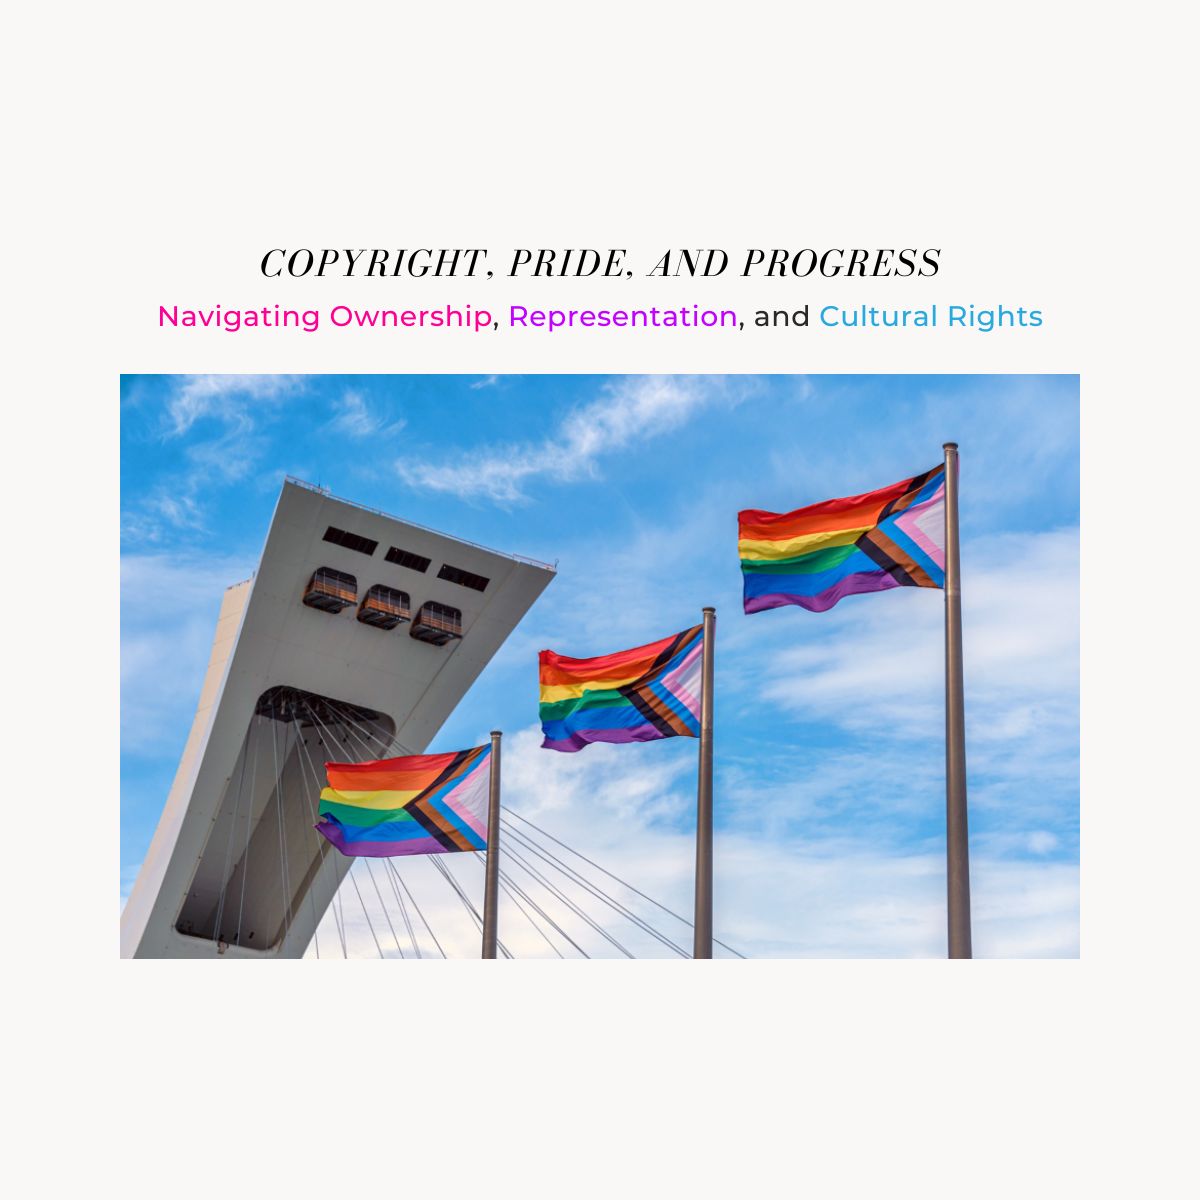 Rainbow revolution: the story behind the Pride flag